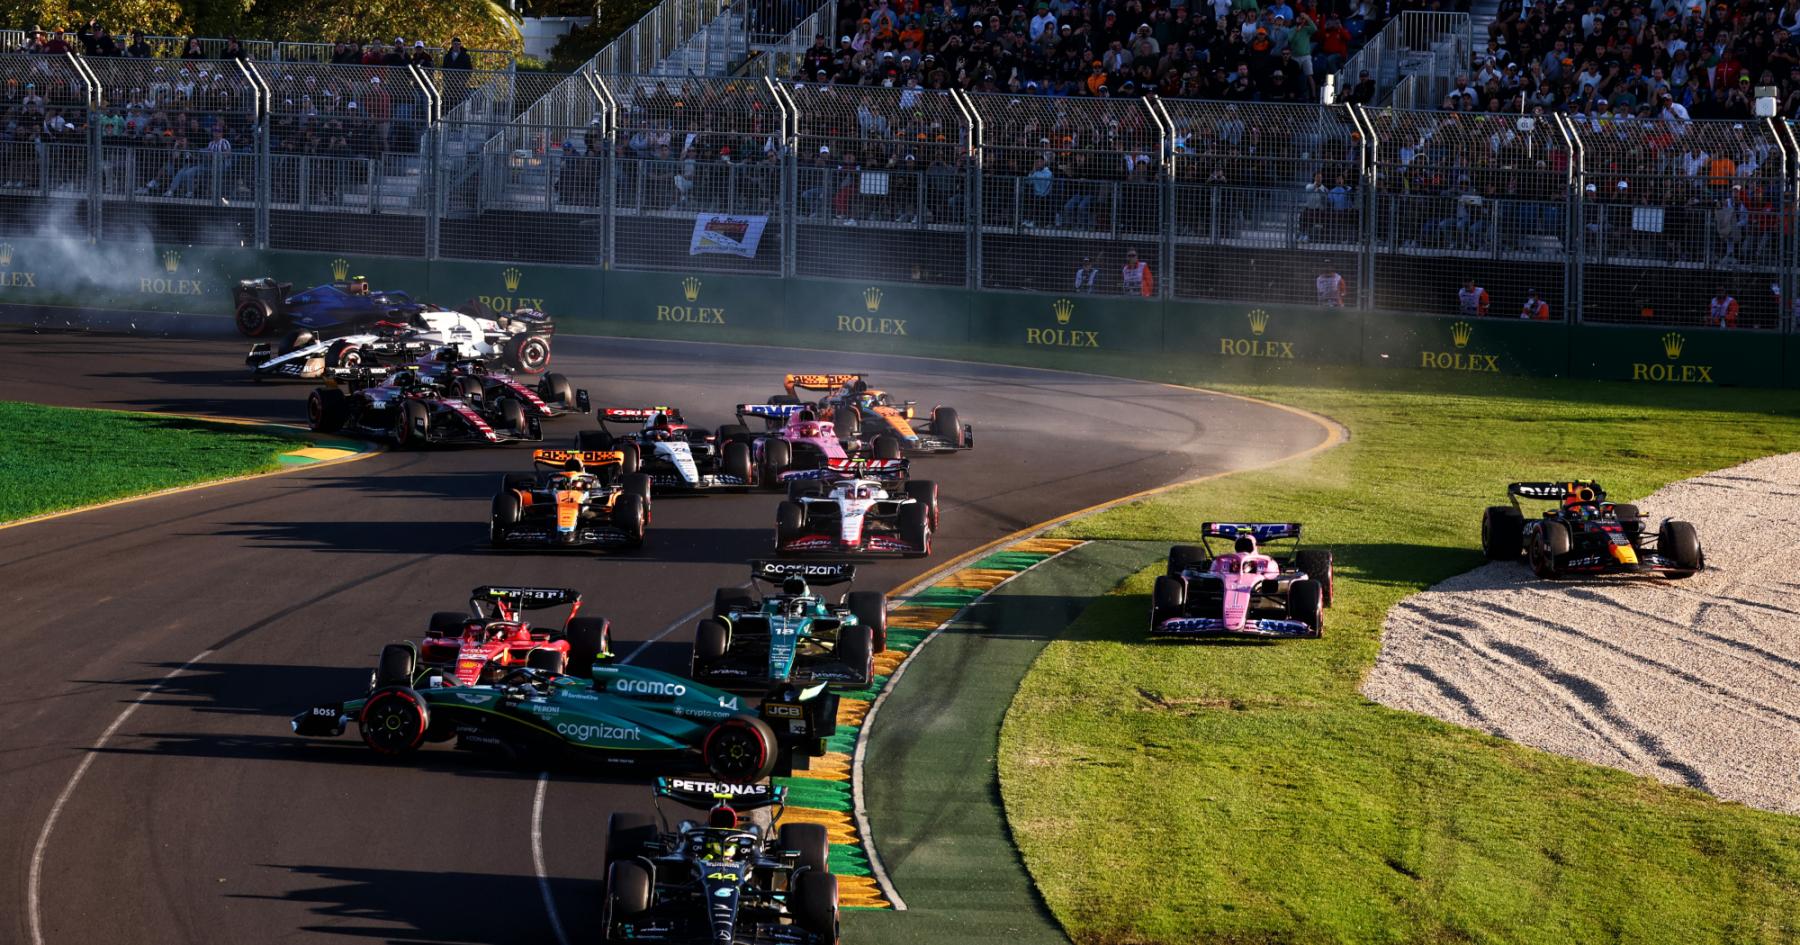 Pirelli's Bold Choice Sets the Stage for Unprecedented Performance at Australian Grand Prix